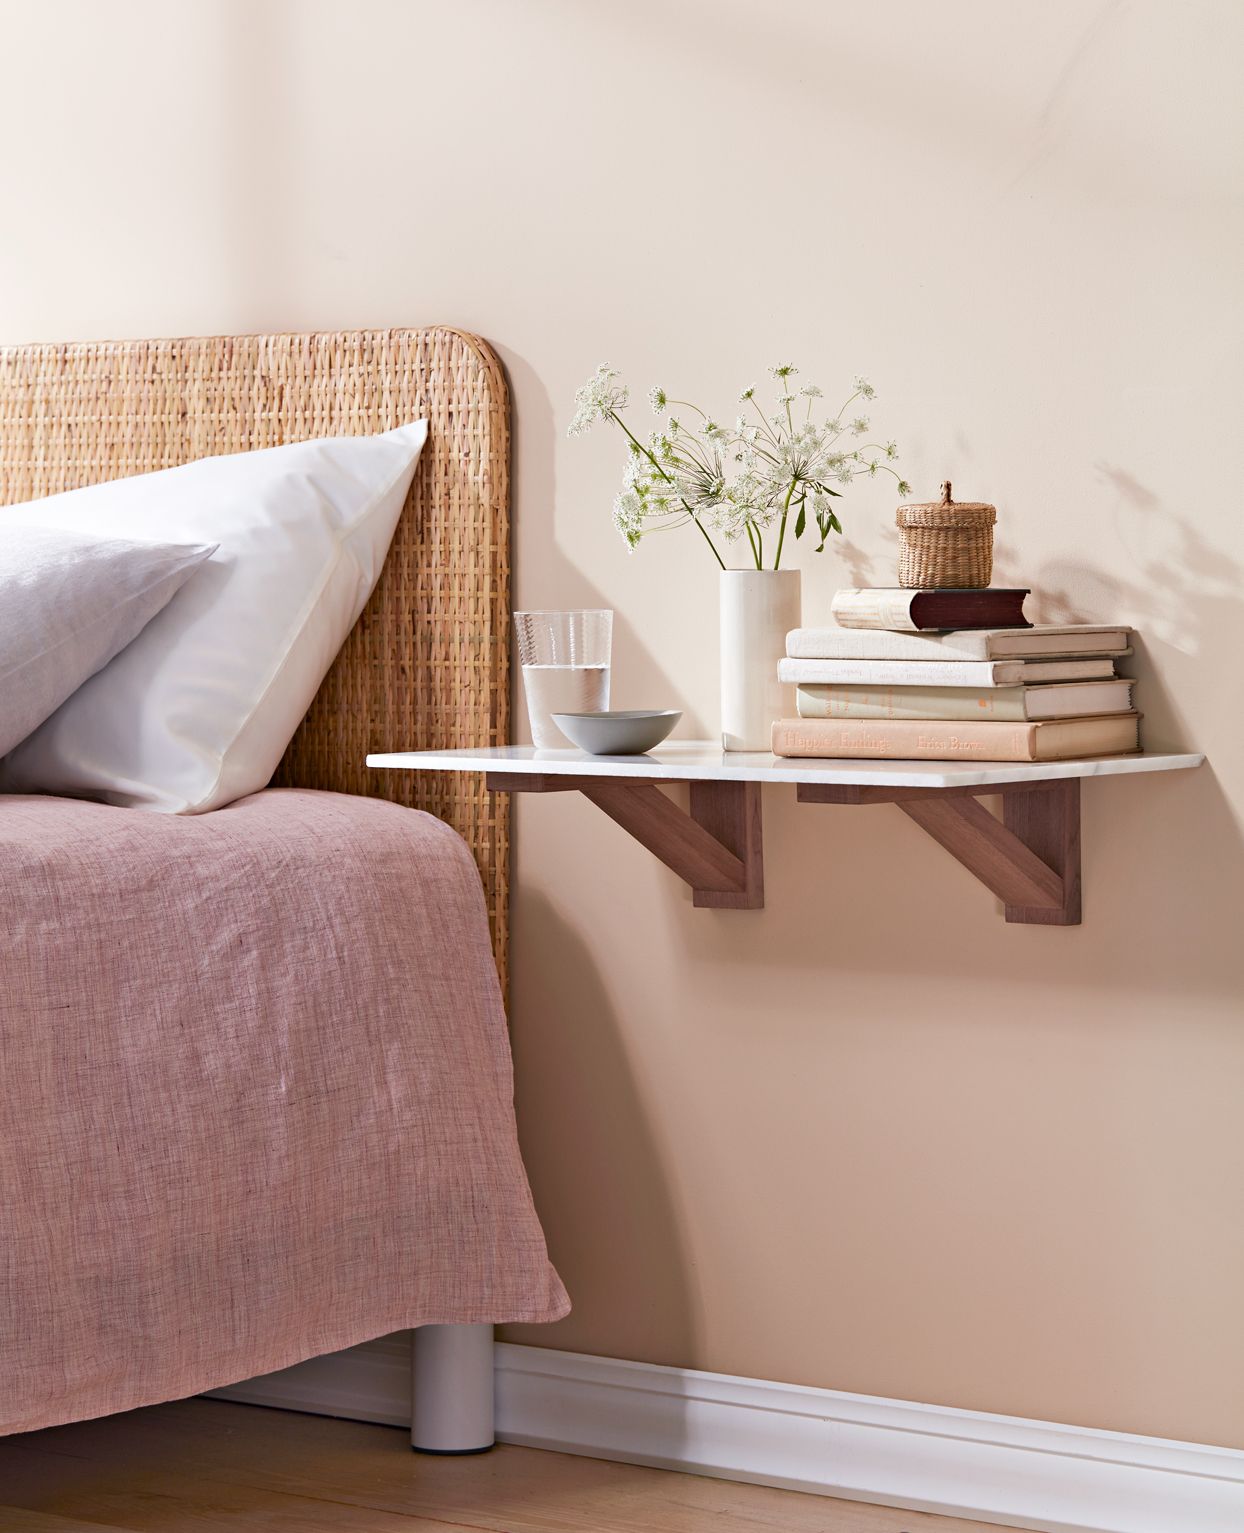 Simple Design with A Floating Bedside Table